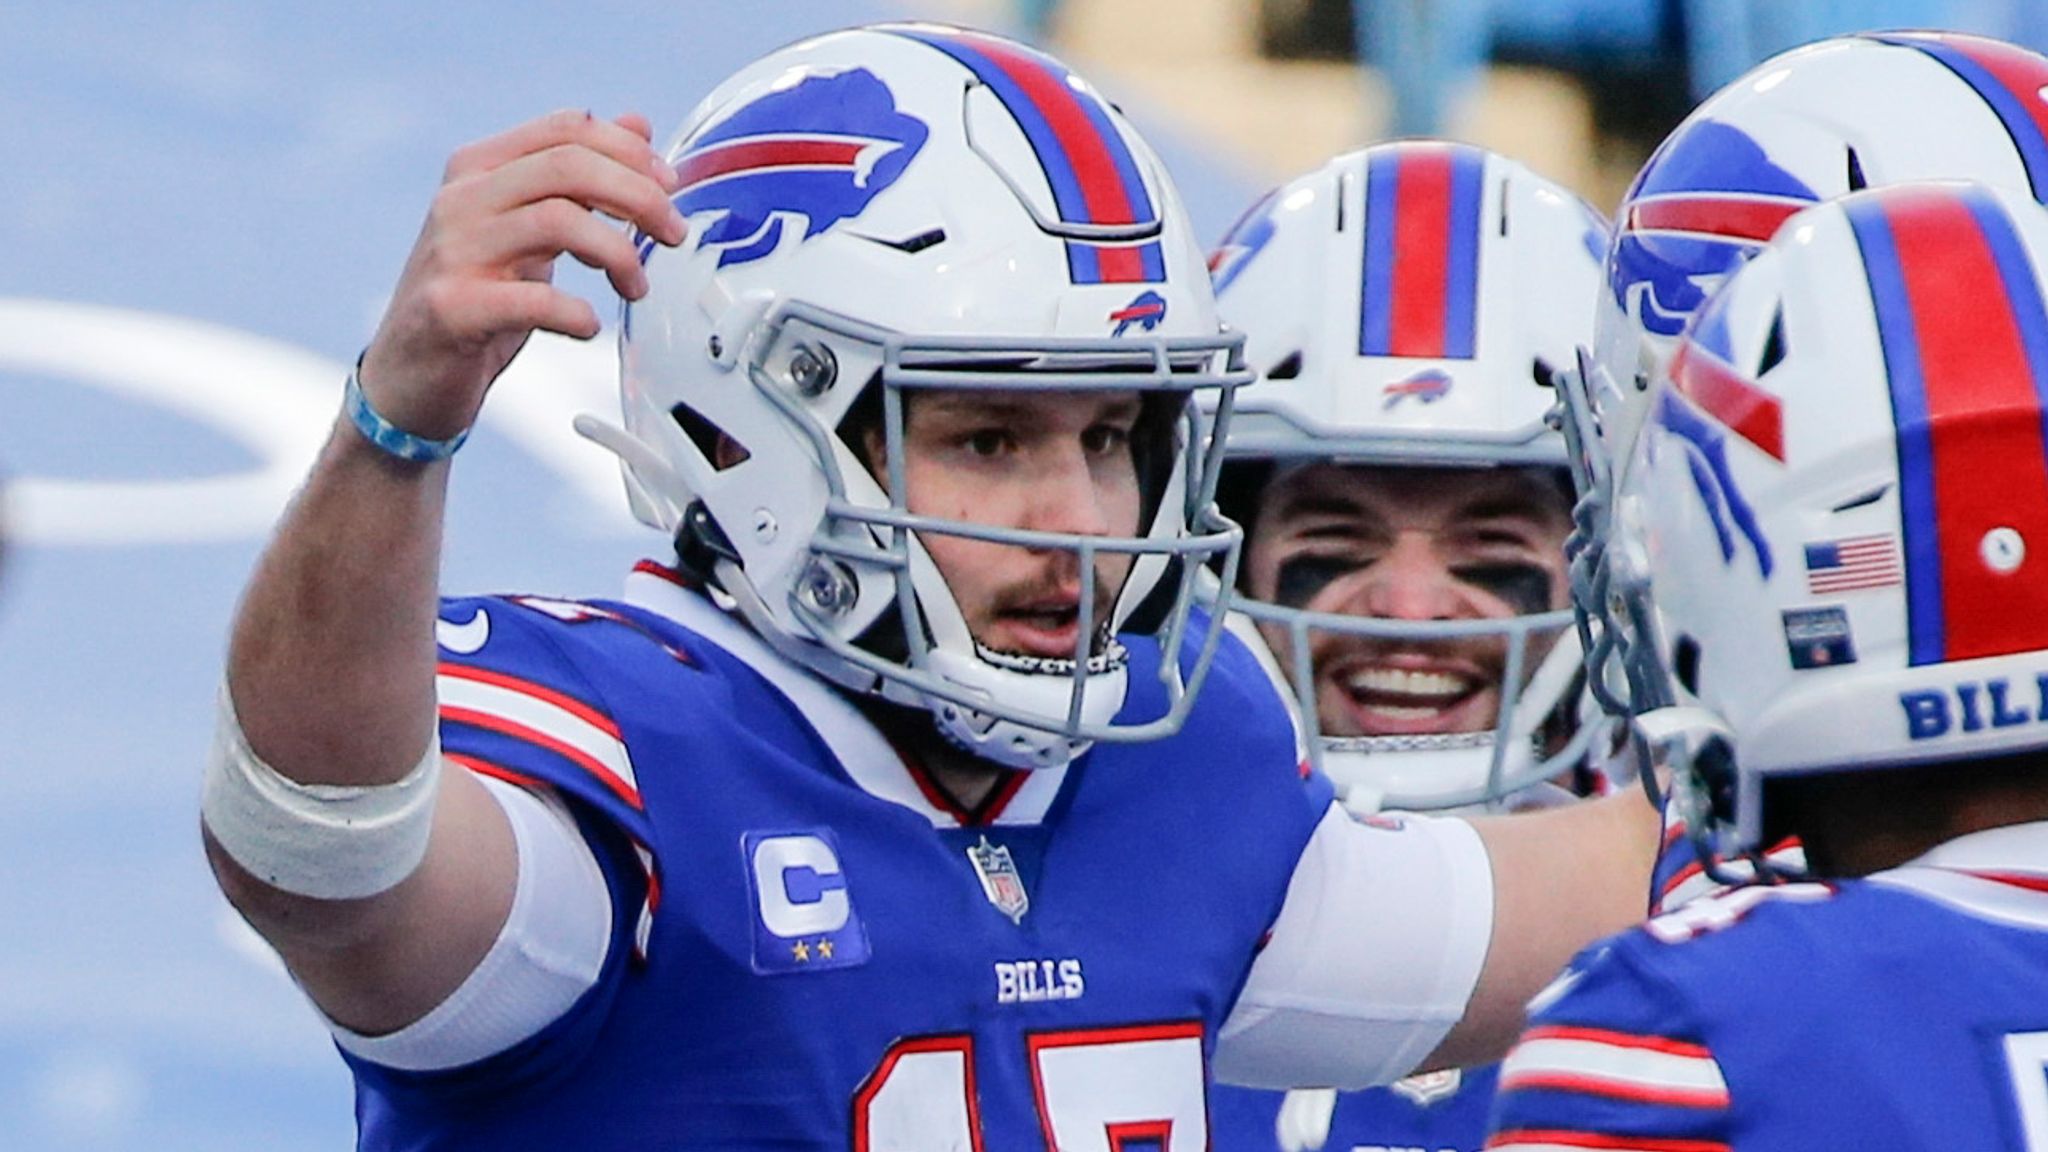 Bills beat Colts for first playoff win since 1995